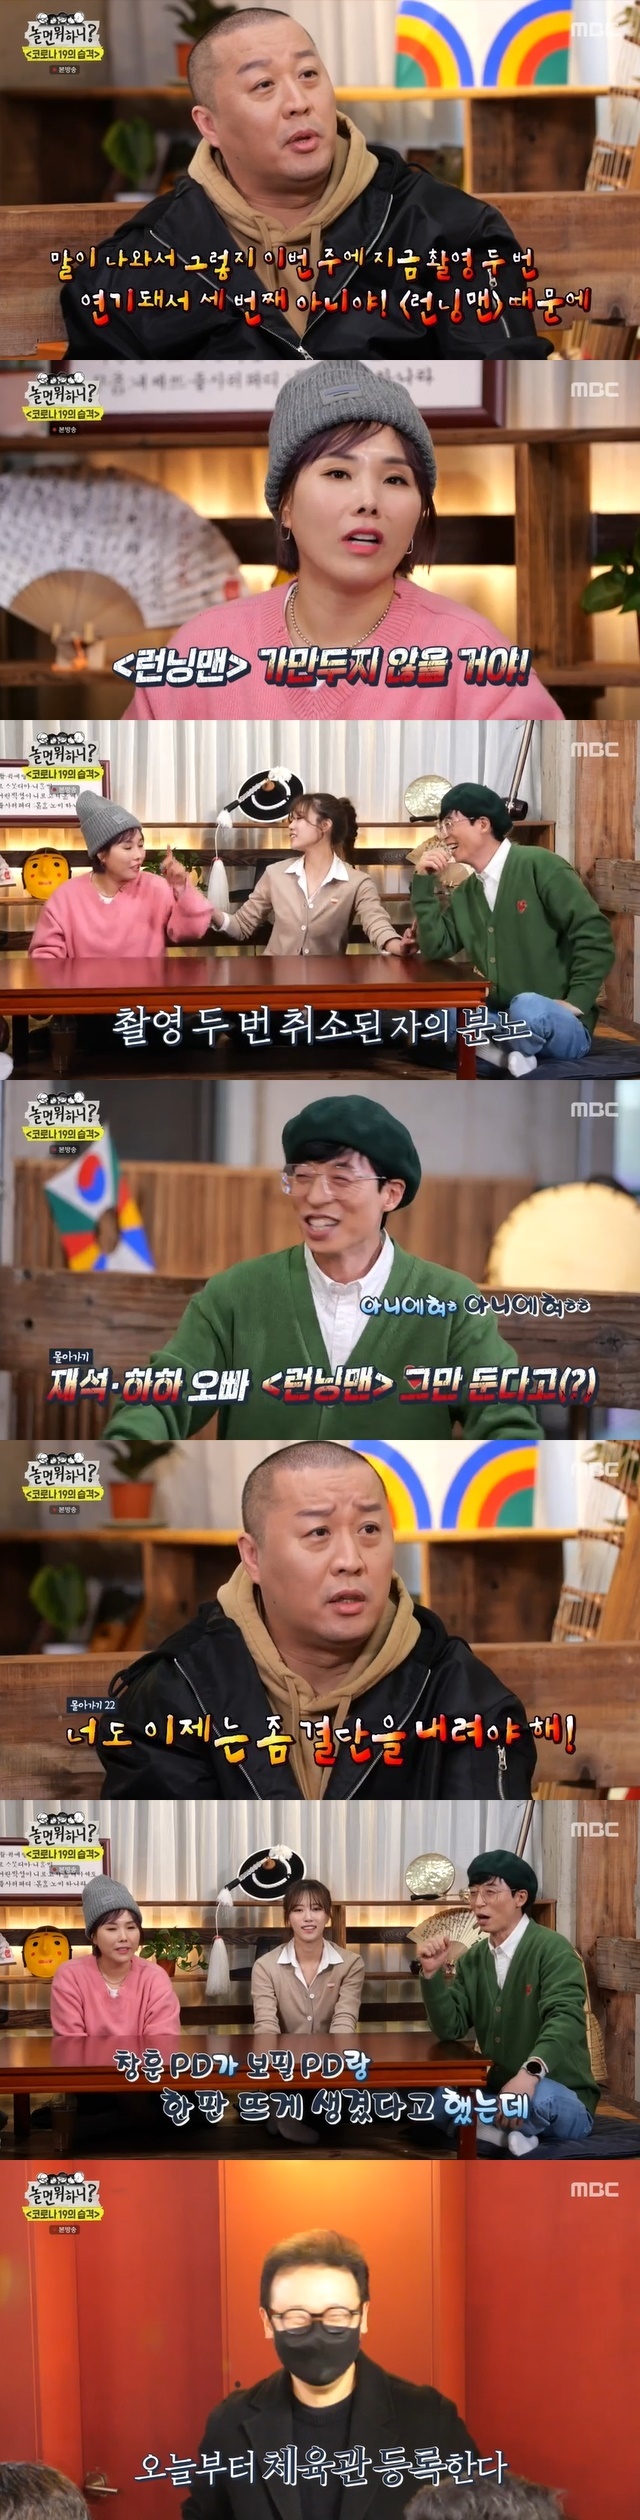 Hangout with Yo, which was hit by a direct hit due to the repeated corona 19 confirmation of Running Man, was properly horned.MBC entertainment Hangout with Yo broadcasted on February 19th day In the 125th, it was reported that the collaboration of the two programs was postponed due to the confirmation of Running Man.On this day, Yoo Jae-Suk opened the opening ceremony, notifying Haha that he could not appear in the self-confirmation with the confirmation of Corona 19.This situation, Jin-ha, brought out the story of Running Man and said, Is not it the third time I have been postponed twice this week?Running Man and Collabor were scheduled to shoot, but Corona 19 confirmed and two shots were shot.Shin Bong-sun said, I will not let Running Man go. Lee Mi-joo drove the momentum and said, There is a sound that Haha quit Running Man.Jin-ha urged Yoo Jae-Suk to make a decision and said, At this point, the members of Running Man should send an apology video to the group at the opening.Jin-ha did not only suffer from themselves, but the staff also took out the work for the filming and reported that they had been harmed for two days.Yoo Jae-Suk then mentioned Park Chang-hoon PD of Hangout with Yo and Choi Bo-pil PD of Running Man, saying, Chang Hoon said he would go to the brink with Bopil.Were doing this with Cullaver. Im in a game with Running Man. When I look objectively, Bopil wins. Chang Hoon loses.Bopil is not a child who can fight only by studying. He is from Anyang. What does Anyang have to do with it? Jin-ha said, Anyang does not look like the end of the day.Yoo Jae-Suk also detailed the circumstances of Agnaldo Timóteo, whose collaboration filming was canceled after members of Running Man were confirmed to be Corona 19.Yoo Jae-Suk said: There was a close contact, so the recording of Agnaldo Timóteo was cancelled; I tried to re-establish my place the next day, but I kept checking (members).Seok-jin was talking to his brother this morning, and he was coughing. It was weird when I was confirmed.I checked and around the afternoon, Seokjin Lee did a quick antigen test, and there he was positive and arranged all the schedules. Haha is left. He told Haha, How about you? He said that the situation was not good.The shooting is only a few hours away, and we (What do you do when you play) have no broadcast volume. When I have to make a decision, Bongsun calls me and it is called a shop.I asked if I had made up, so I laid the foundation. Shin Bong-sun complained that Yoo Jae-Suk had asked if he should not be based on the phone first, and that he had only three black bases because of Running Man.Yoo Jae-Suk said, We decided to make a recording and Haha came out the next day (the result).On the other hand, I responded well, said Agnaldo Timóteos choice, and Jin-ha said, Agnaldo Timóteo was almost a big deal. Shin Bong-sun praised Yoo Jae-Suks decision to cancel, saying he was an experienced person here.I am a corona expert because I have experience, Yoo Jae-Suk said, nudgingly, Anyway, some people pass by slightly, but some people have a risk of going to seriousness, so I think I should pay attention to personal hygiene.